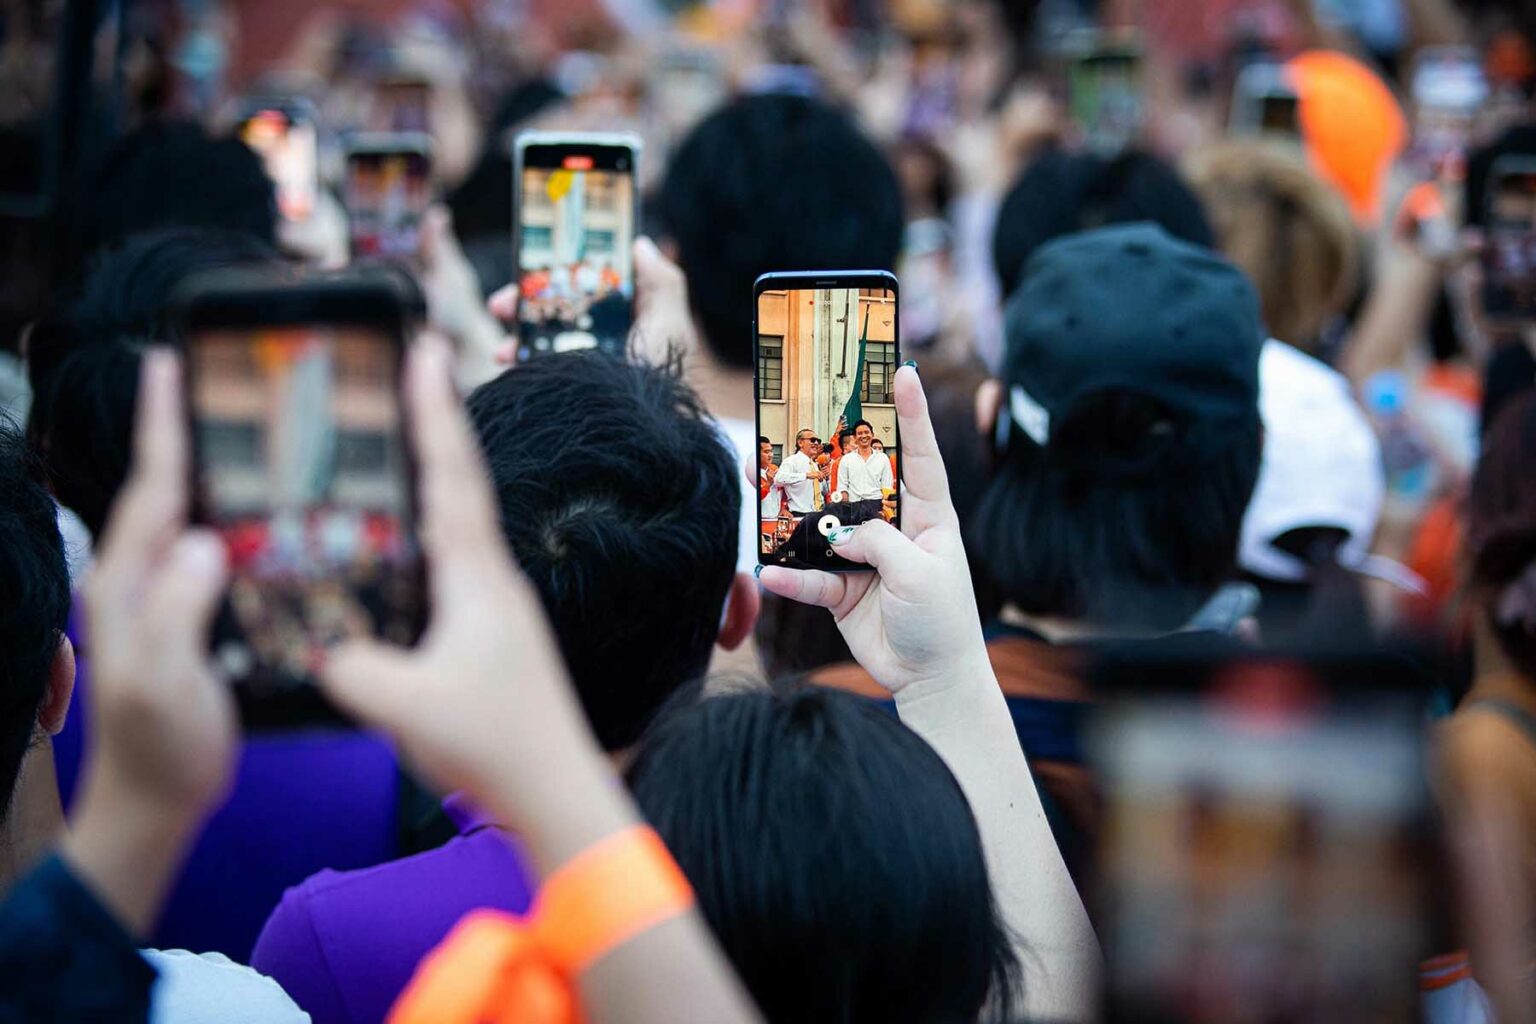 A sea of mobile phones as a crowd all film an event.